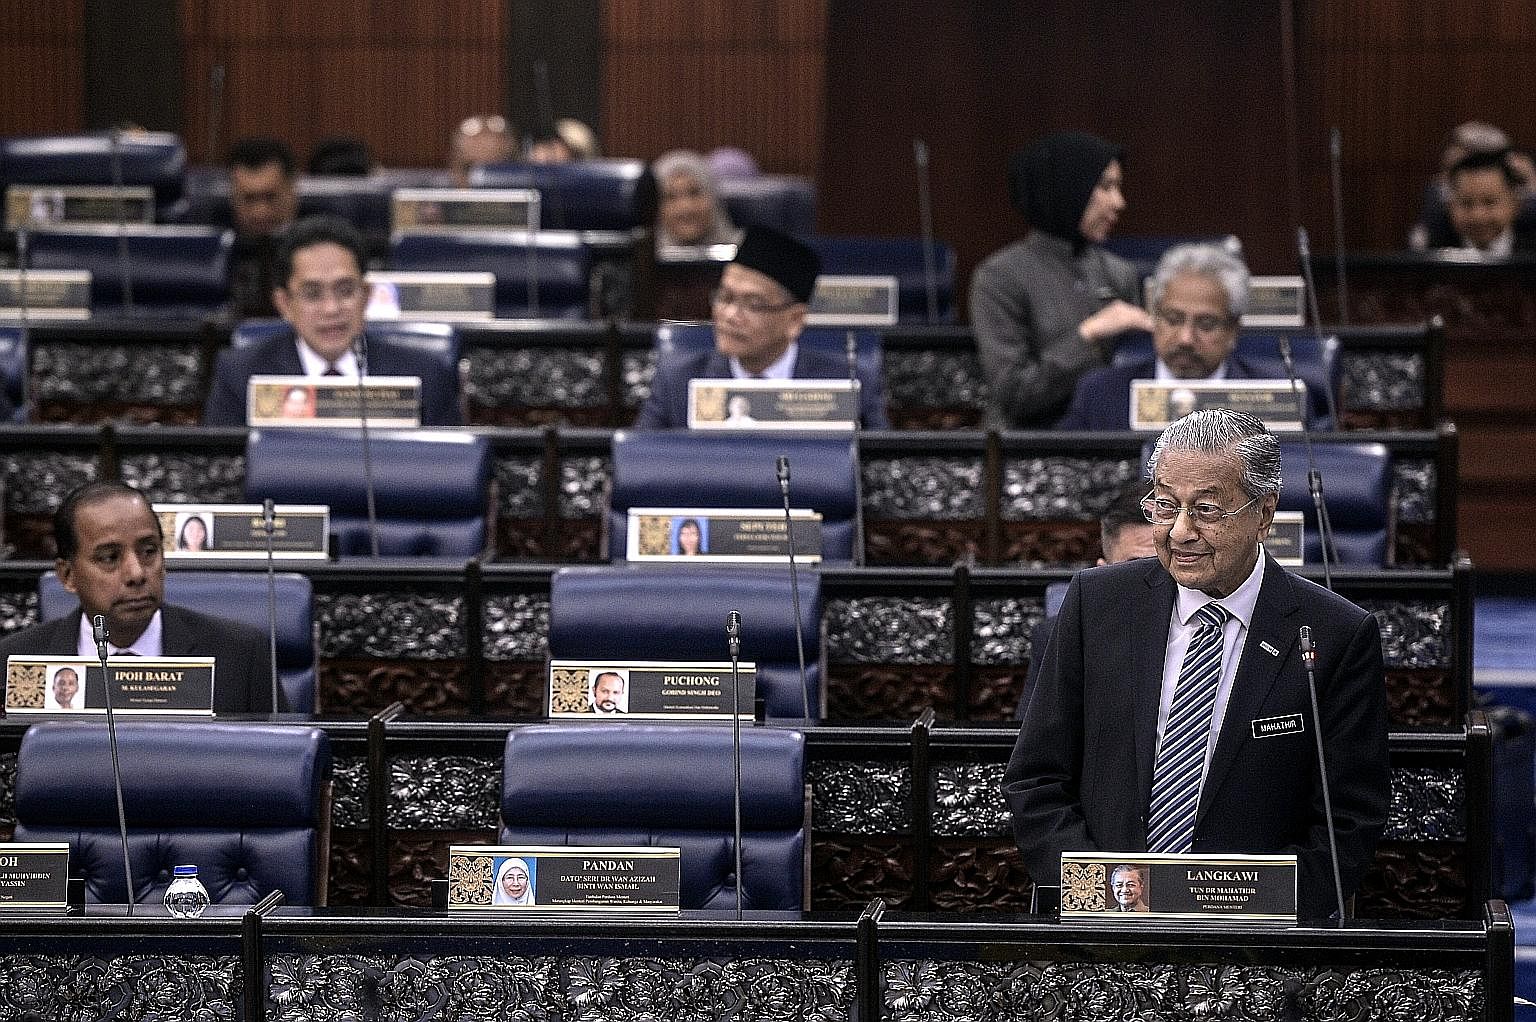 Malaysian Prime Minister Mahathir Mohamad marked his 94th birthday yesterday with a busy day in Parliament. The sprightly nonagenarian took questions at a Prime Minister's Question Time session, briefed opposition leaders on a proposal to lower the v